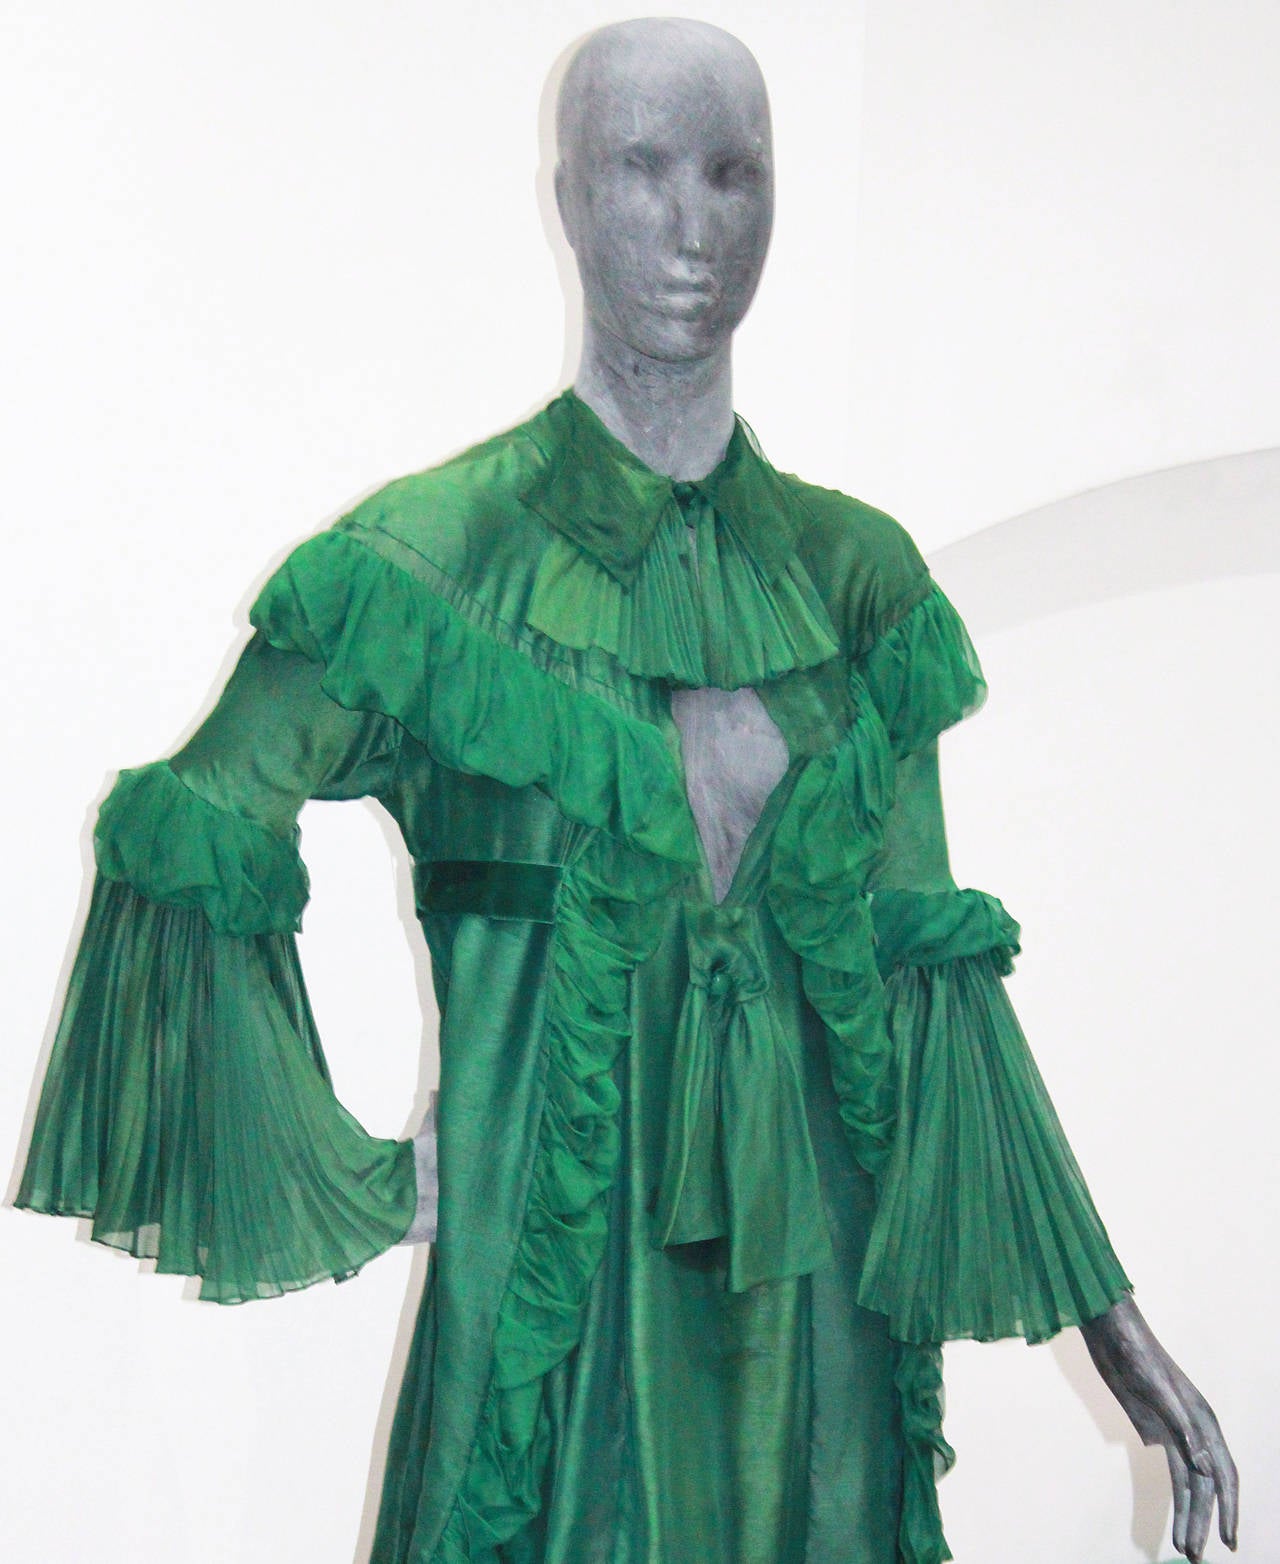 A fine and rare runway dress by Yves Saint Laurent, the dress was first shown on the Paris catwalk for the Spring/Summer 2005 collection and then was showcased on the muse supermodel Karen Elson who wore it to the 2005 Met Ball Gala in New York. The